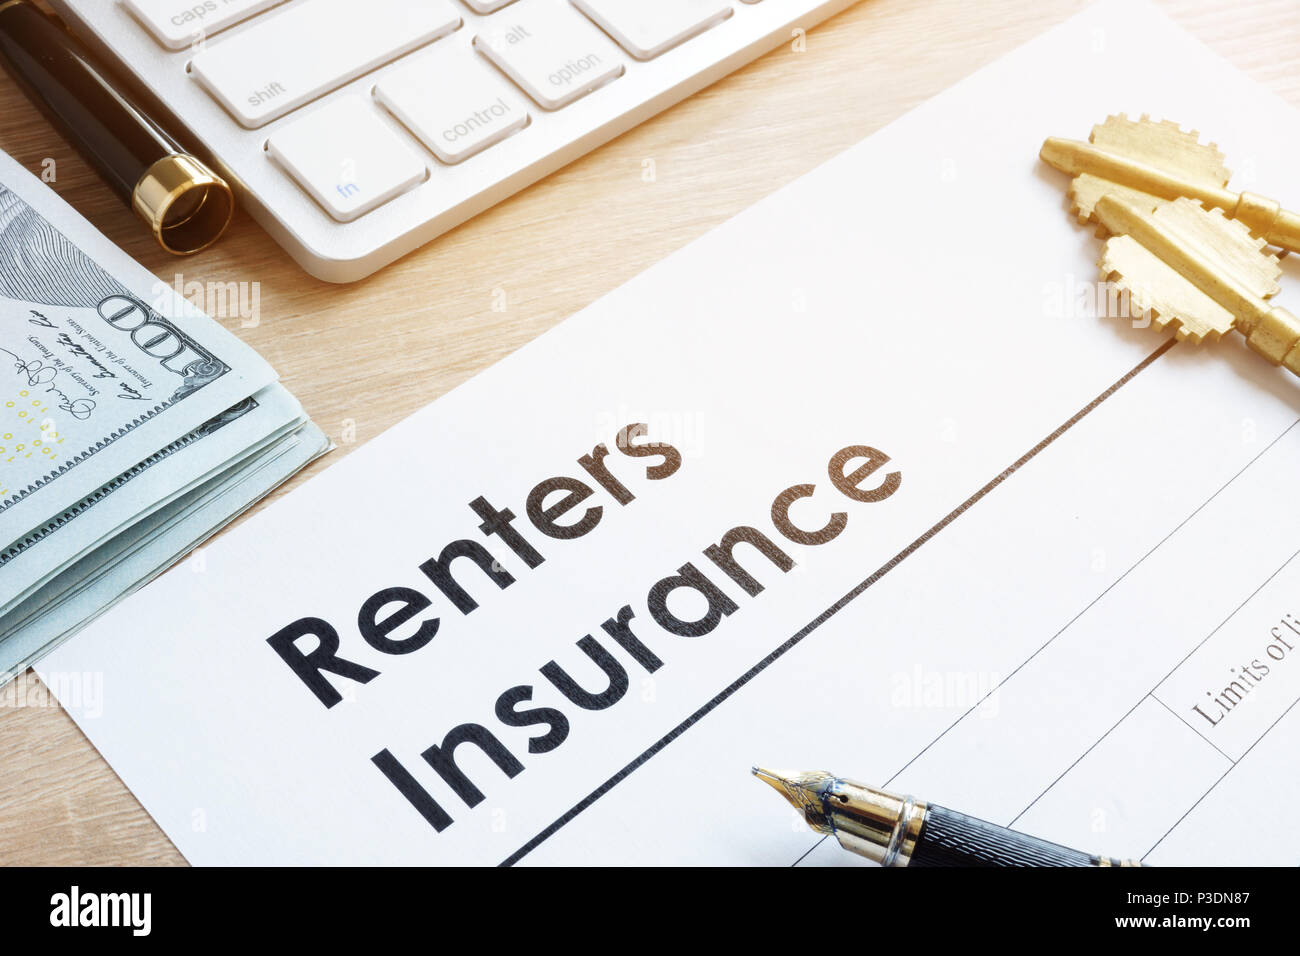 Renters Insurance form on a table and keys. Stock Photo